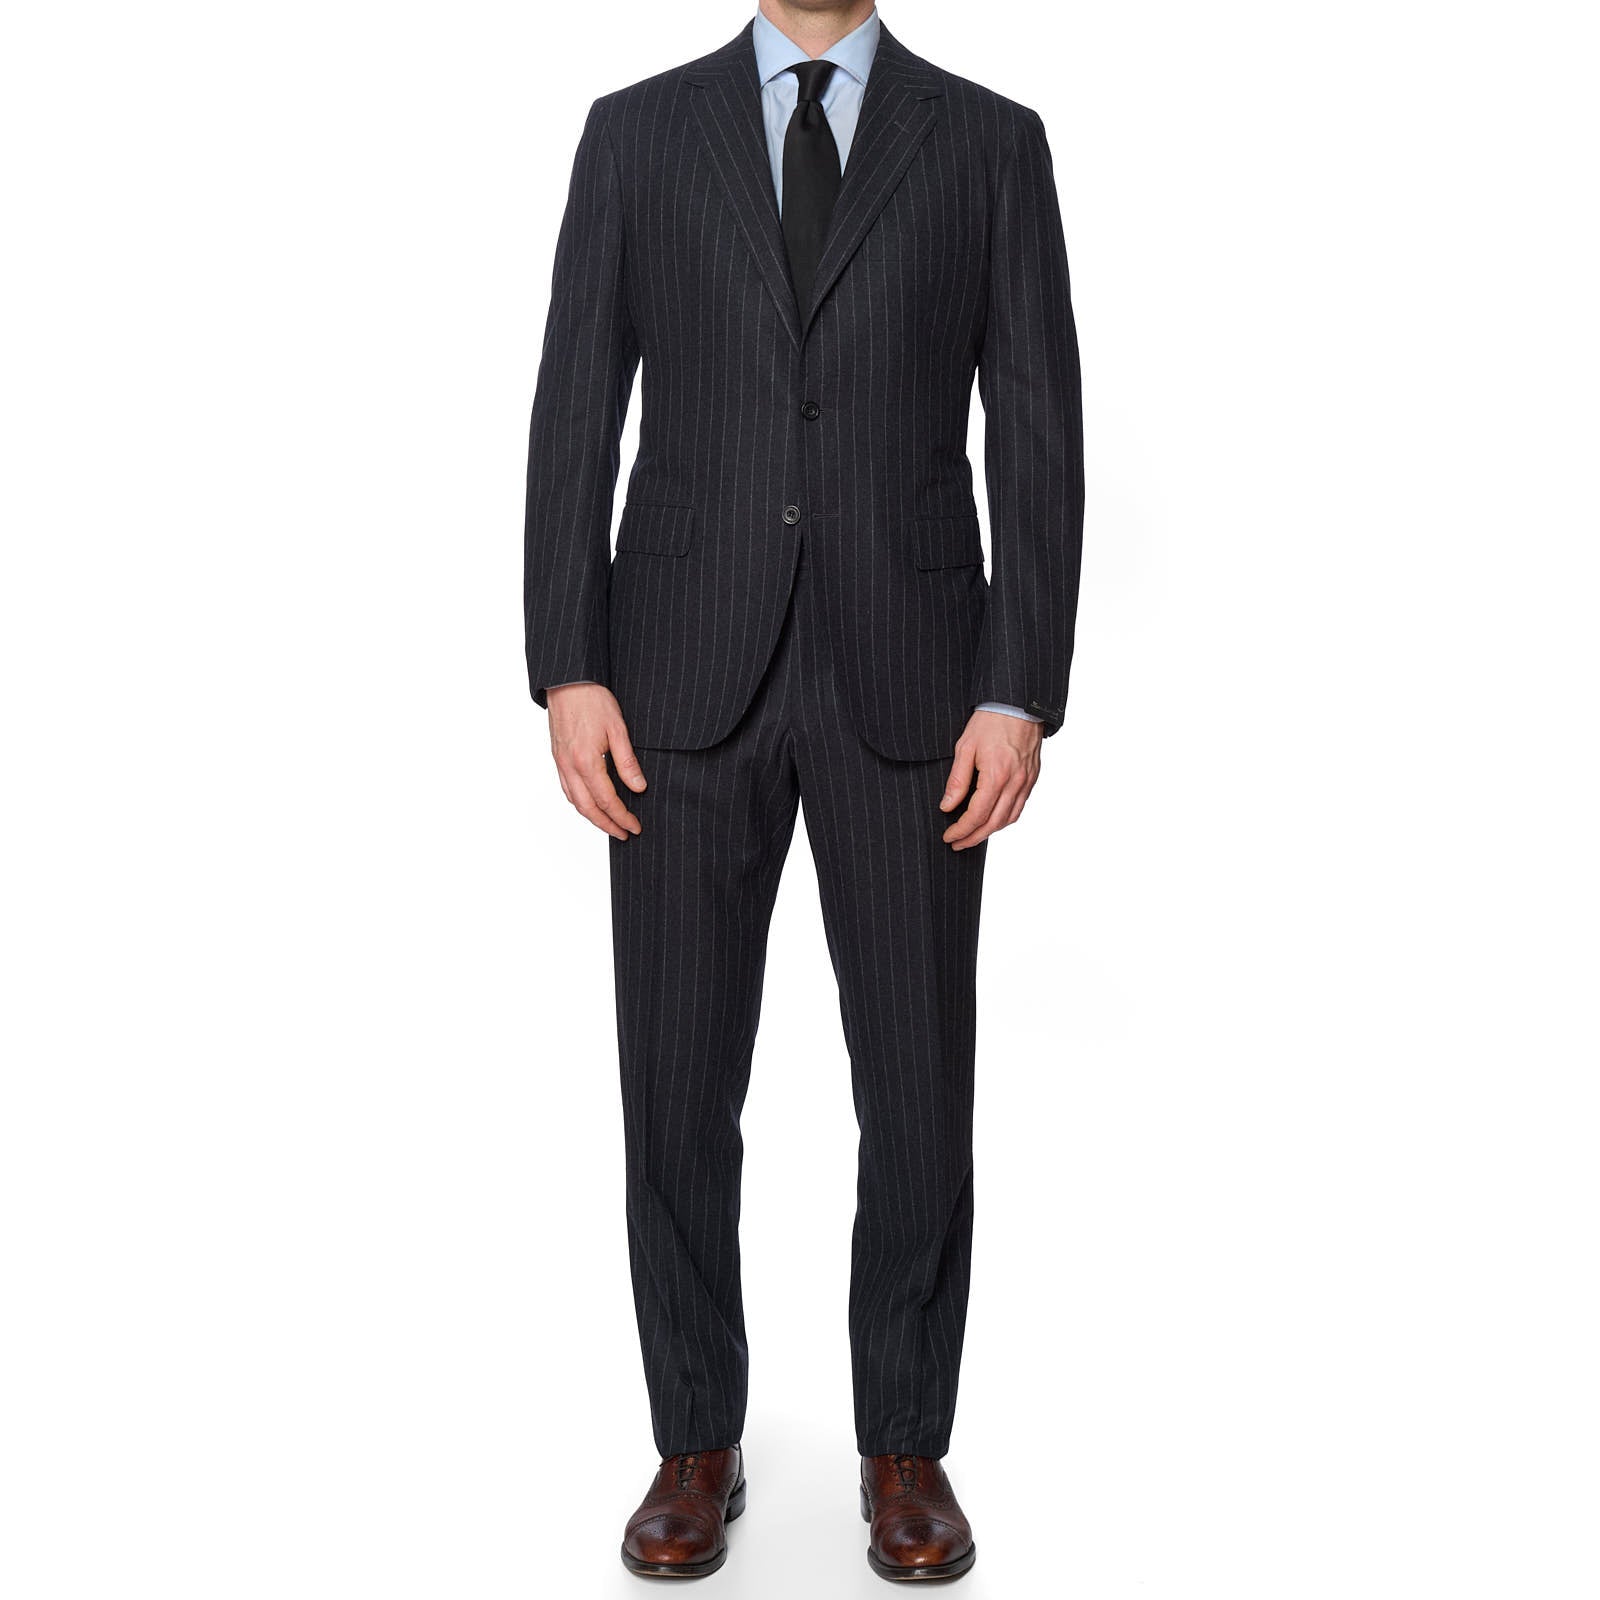 SARTORIO Napoli Charcoal Gray Chalk Striped Virgin Wool Slim Fit Suit NEW